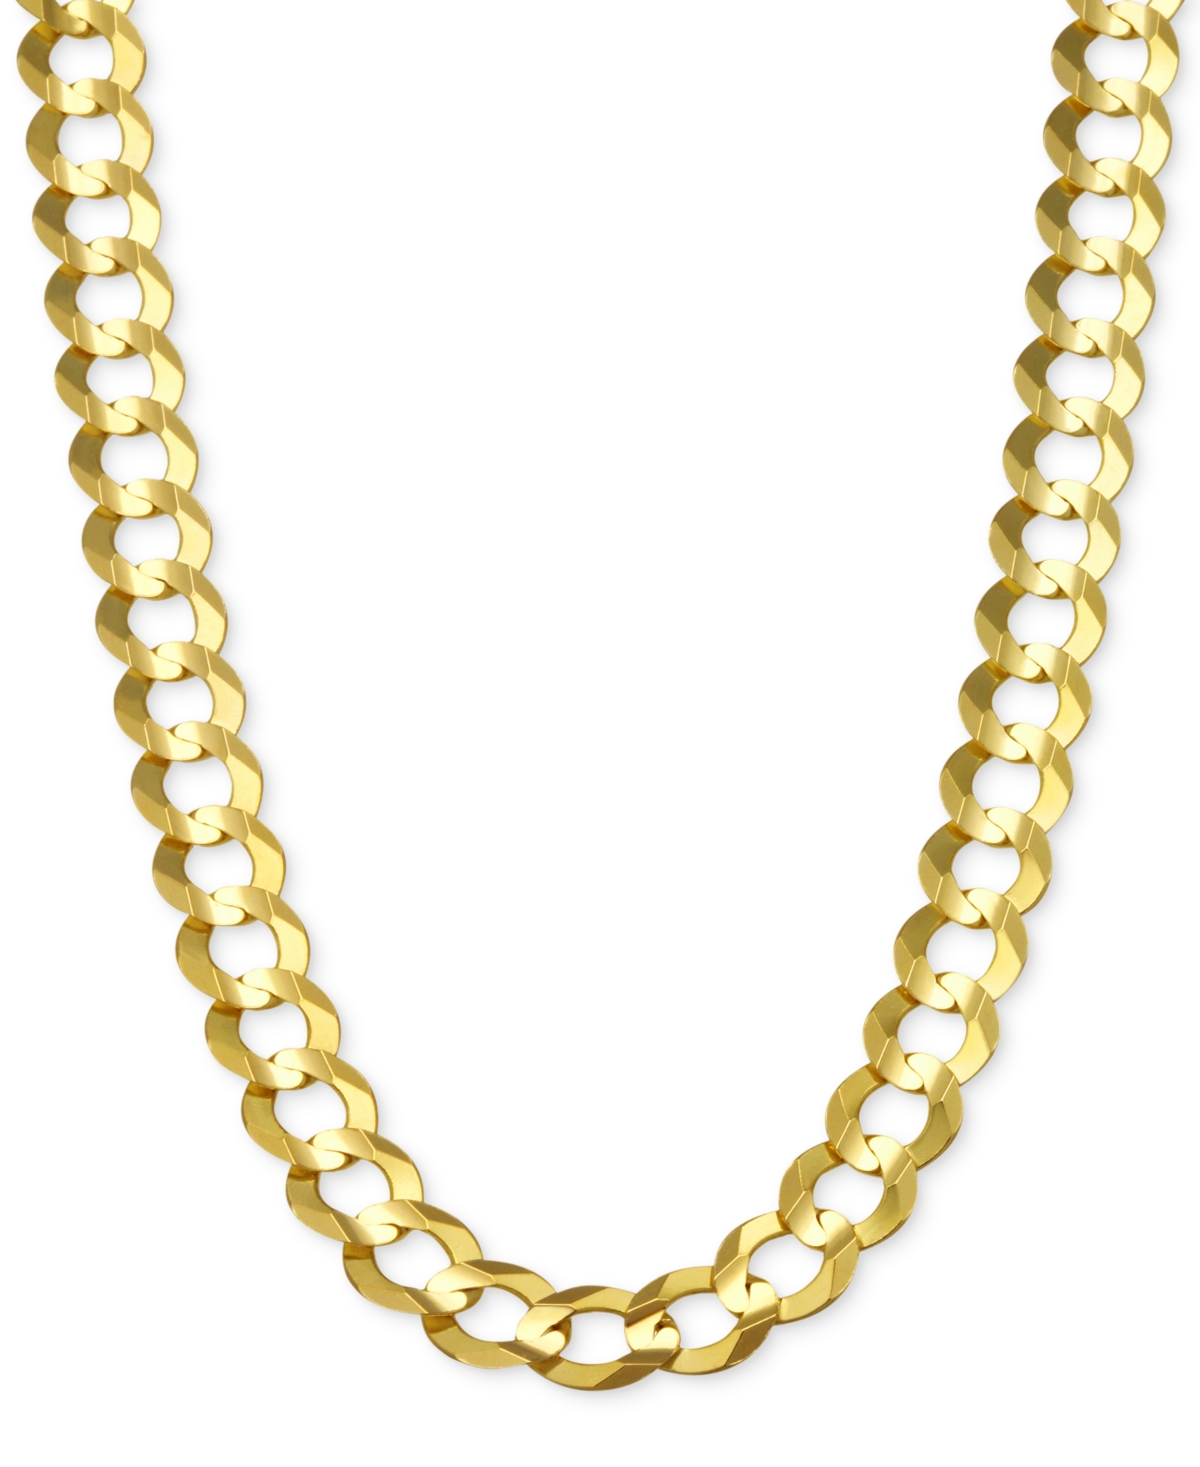 30" Open Curb Link Chain Necklace (7mm) in Solid 14k Gold - Gold